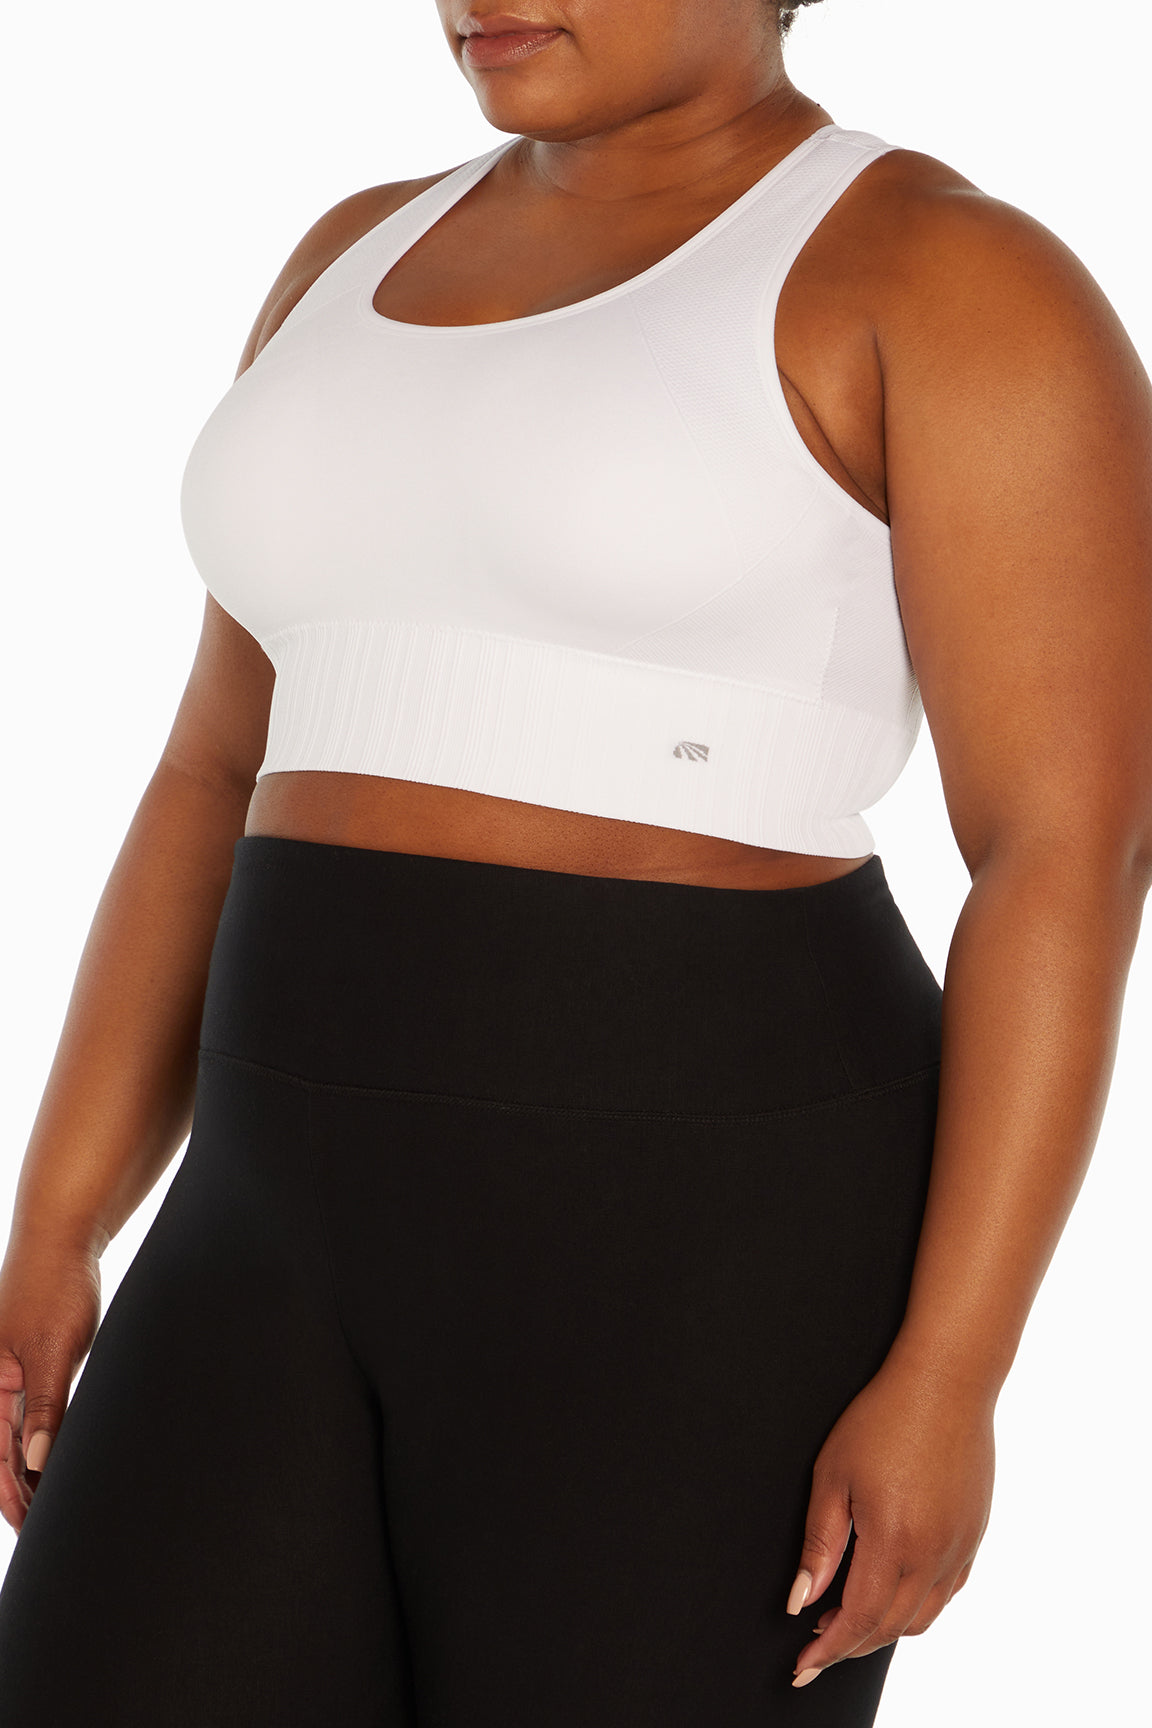 Best Sellers: The most popular items in Women's Plus Activewear